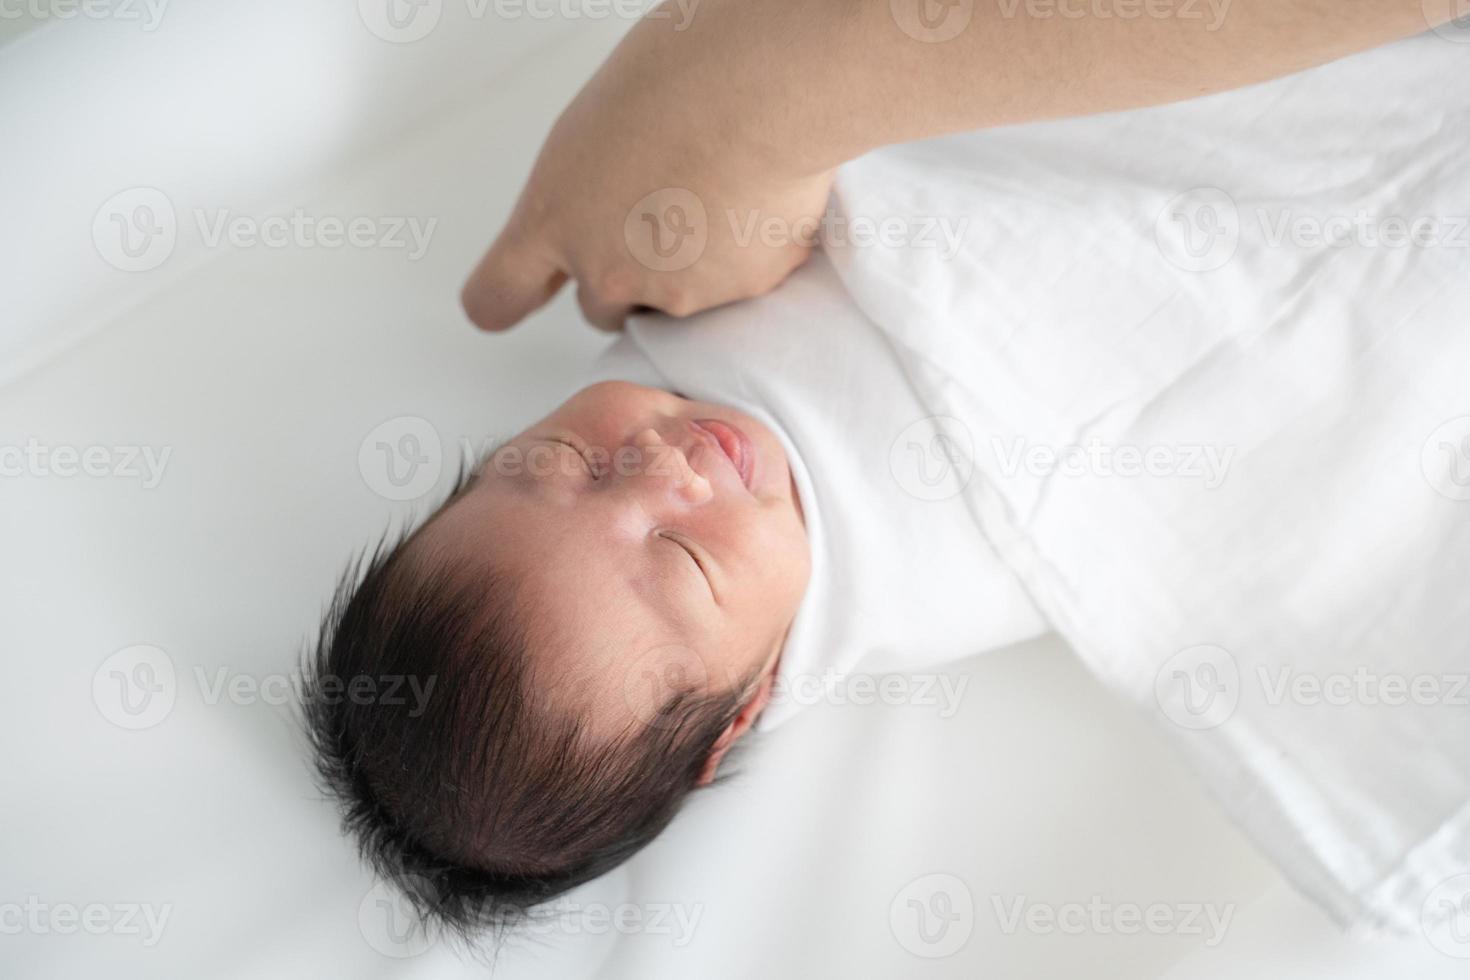 New born baby smiling while mother's hand swaddling her body with white blanket. photo